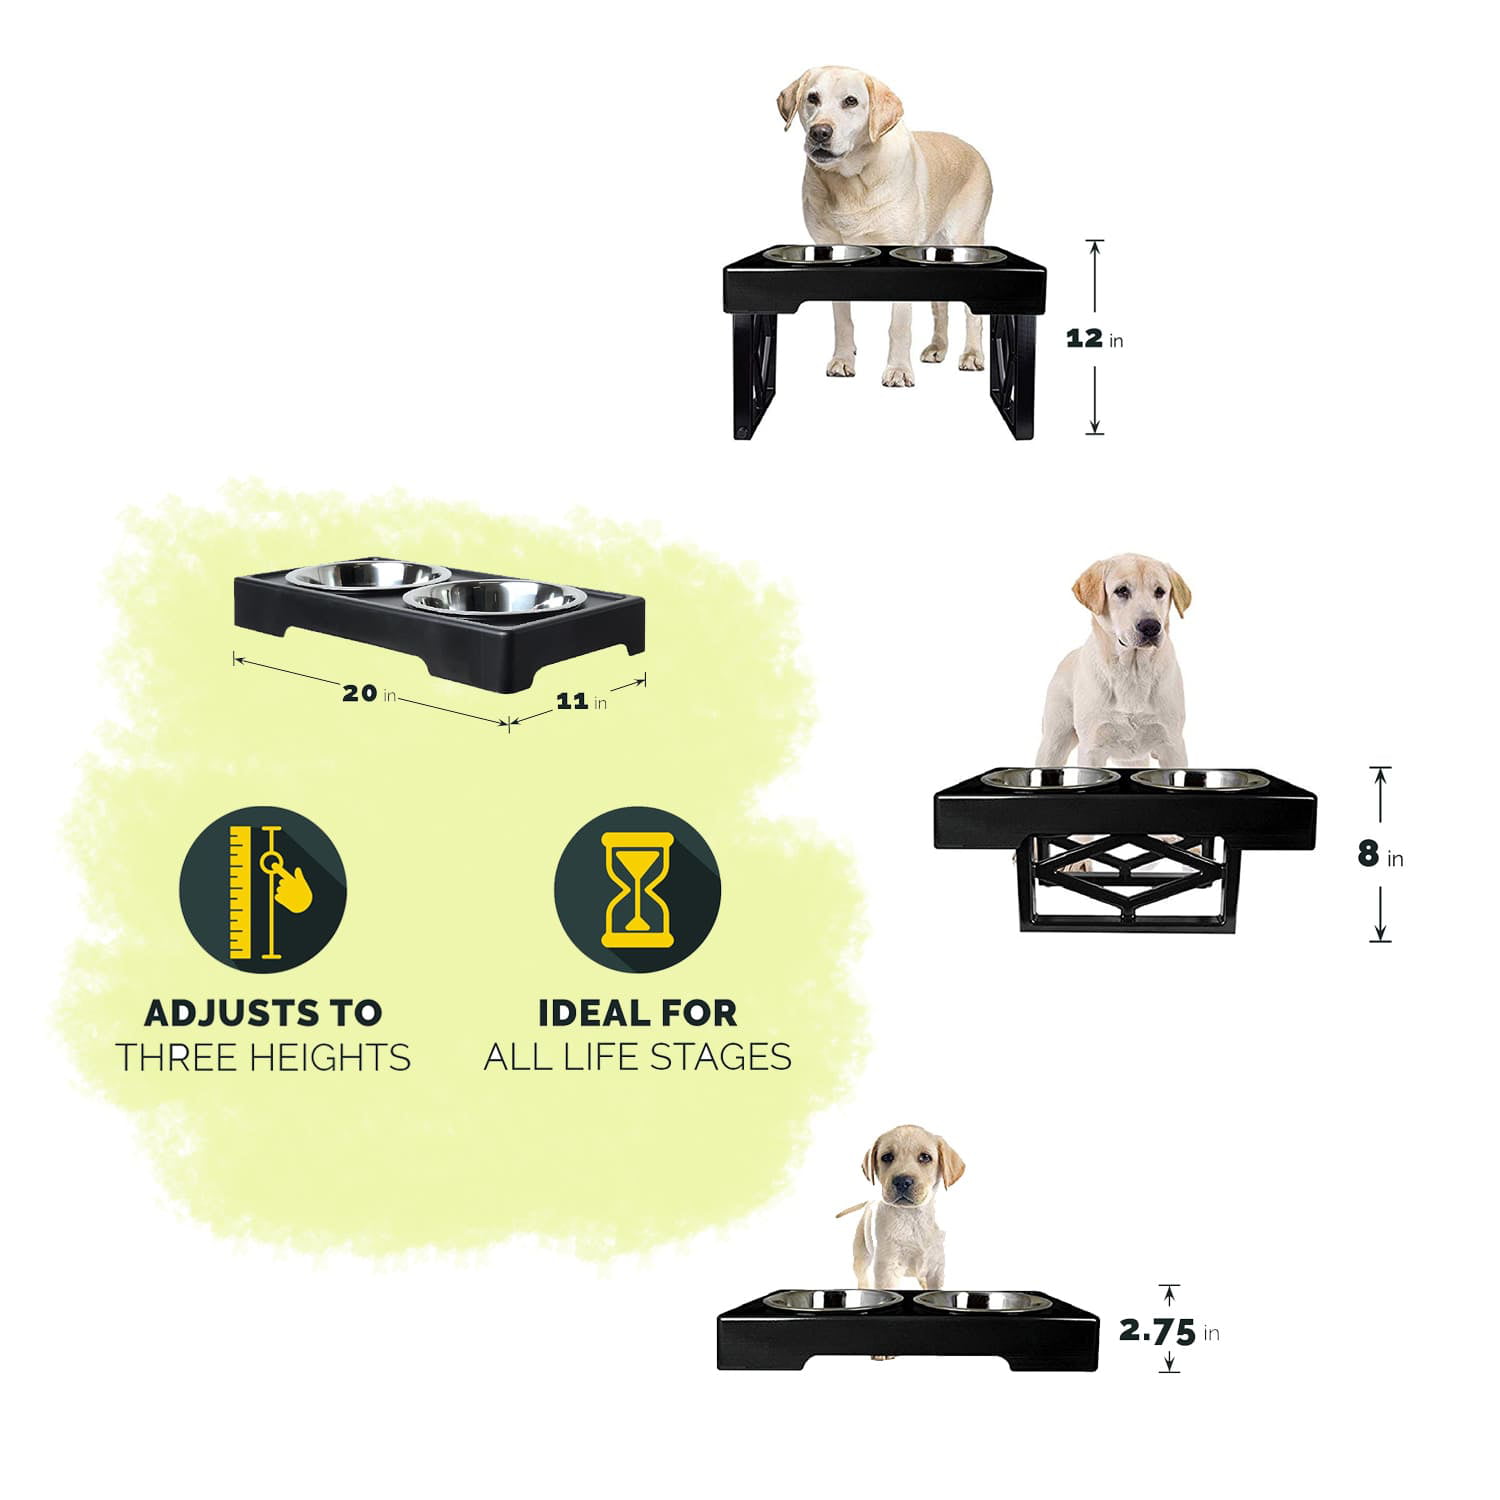 eXuby - 2-Pack Adjustable Dog Bowl Stand for Large Breed dogs